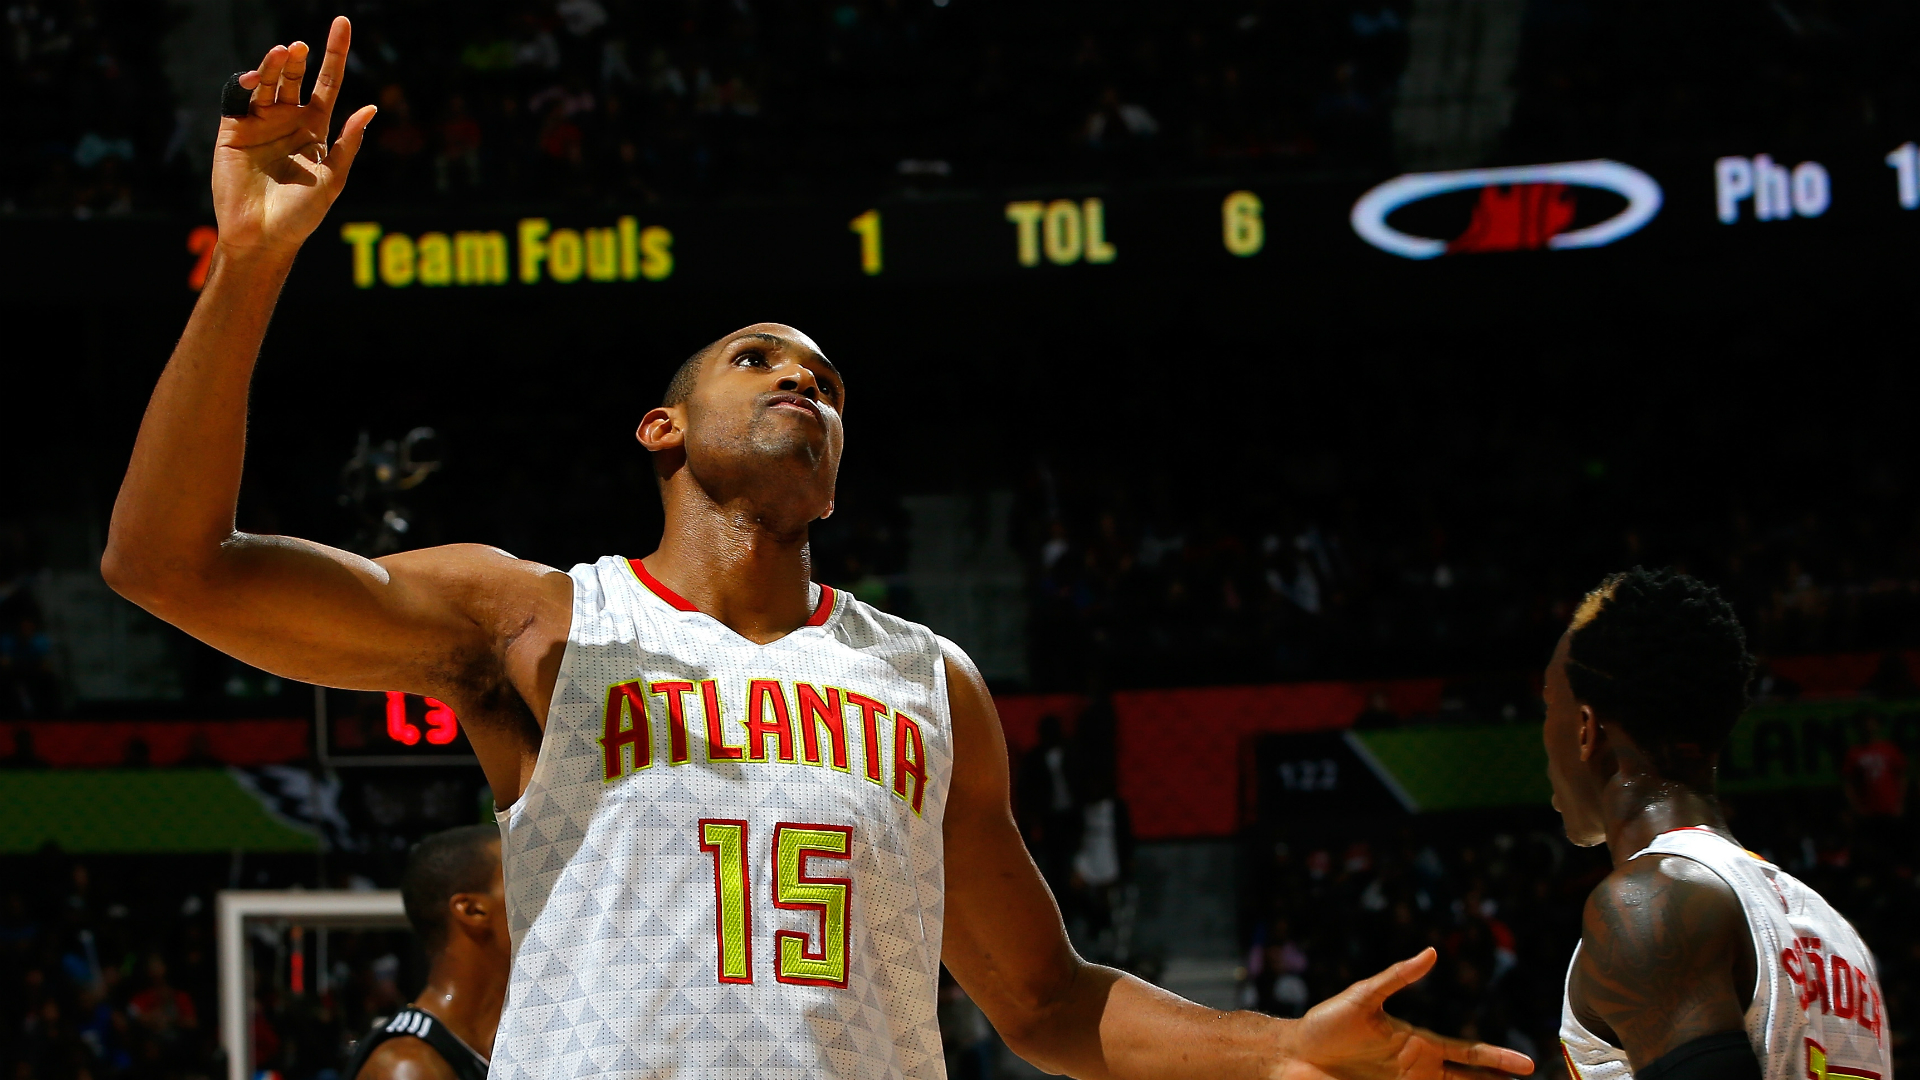 NBA free agency: Al Horford will sign with Celtics, validating